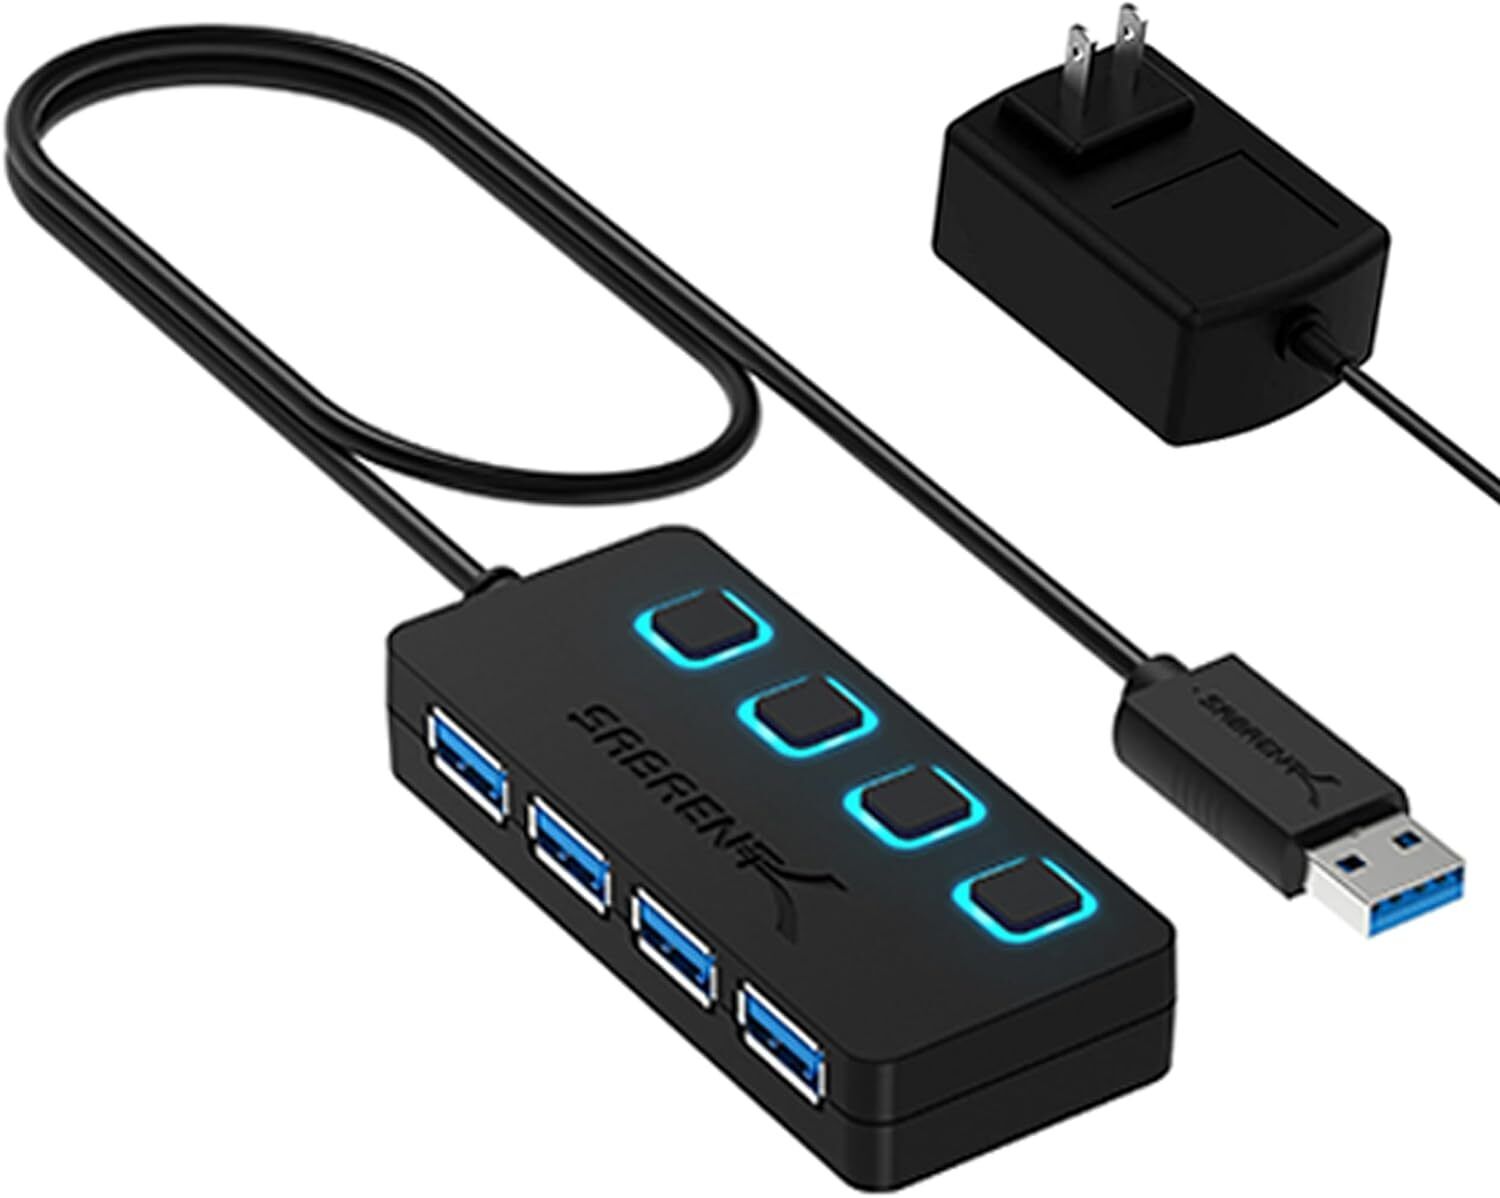 SABRENT 4 Port USB 3.0 Hub with Individual LED Lit Power Switches, Includes 5V/2